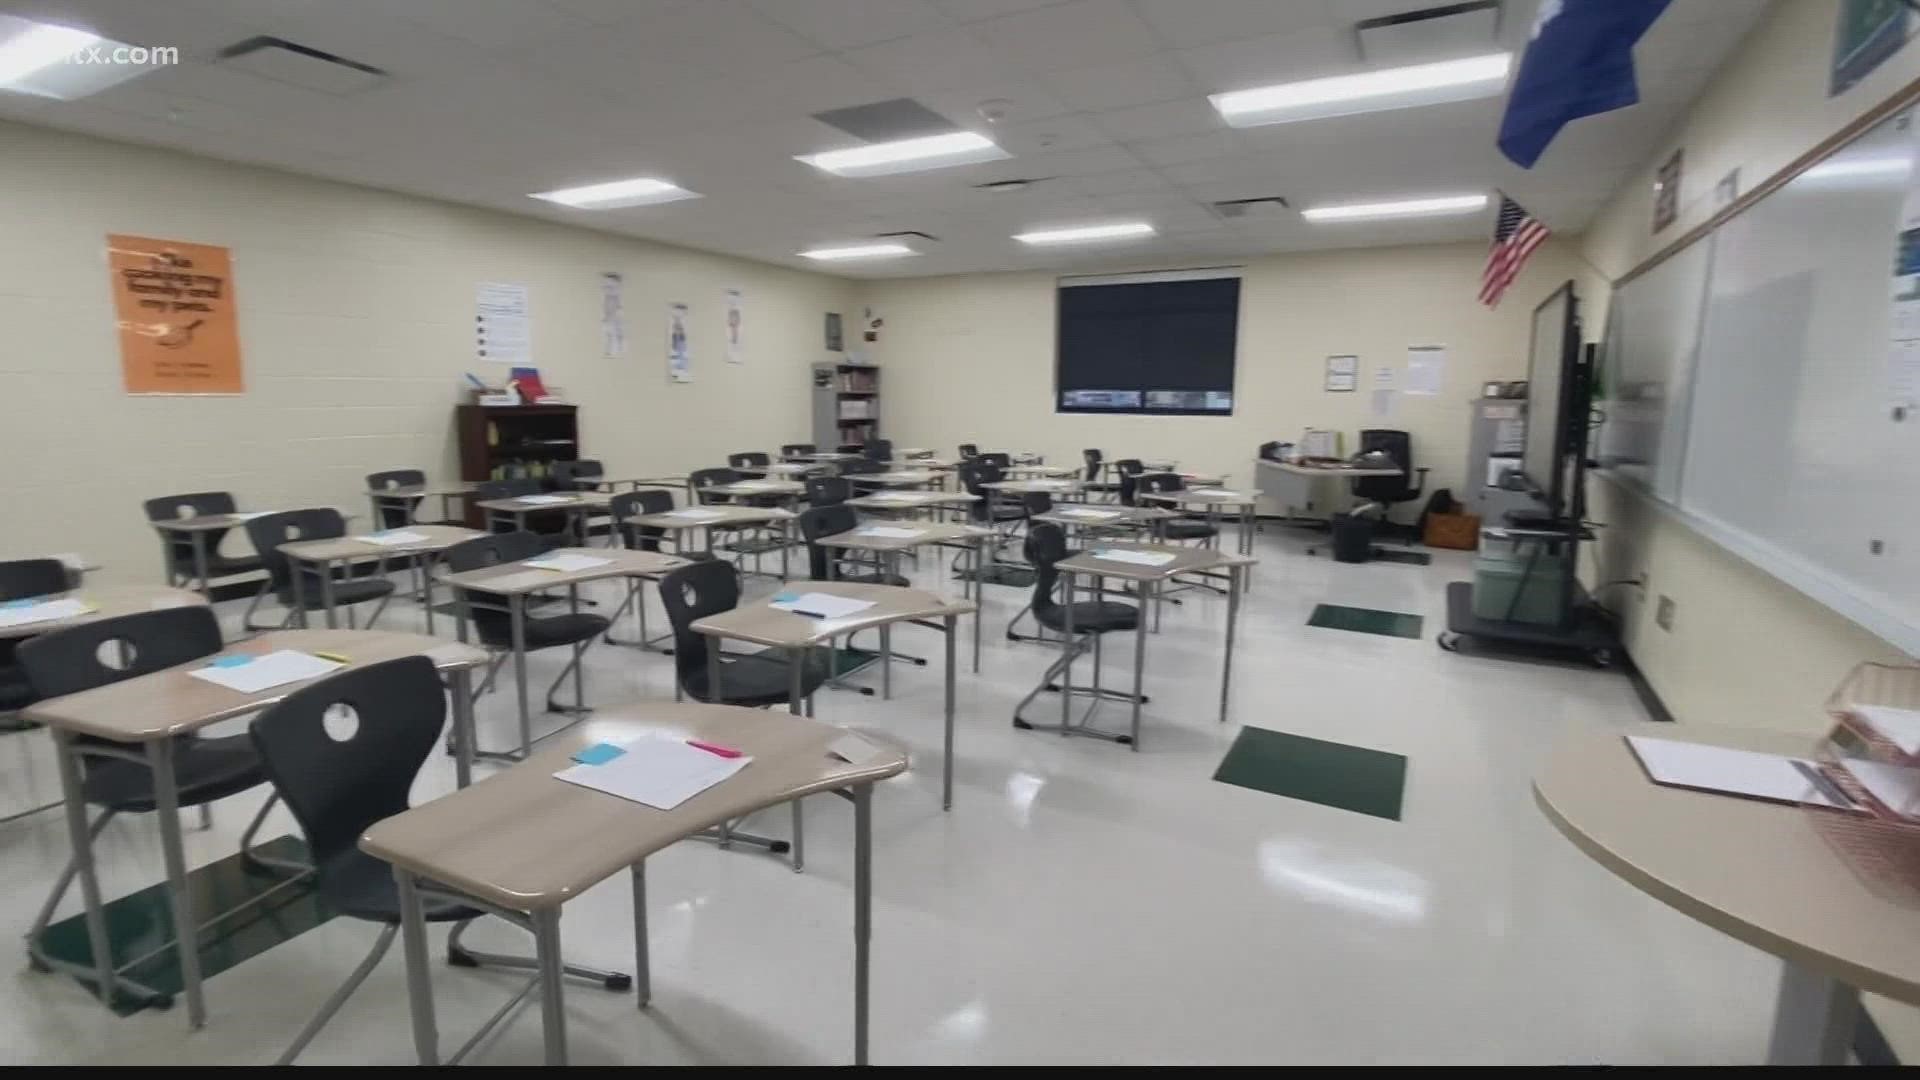 School Student Full X Videos - Dedication welcomes back students to North Central High School | wltx.com